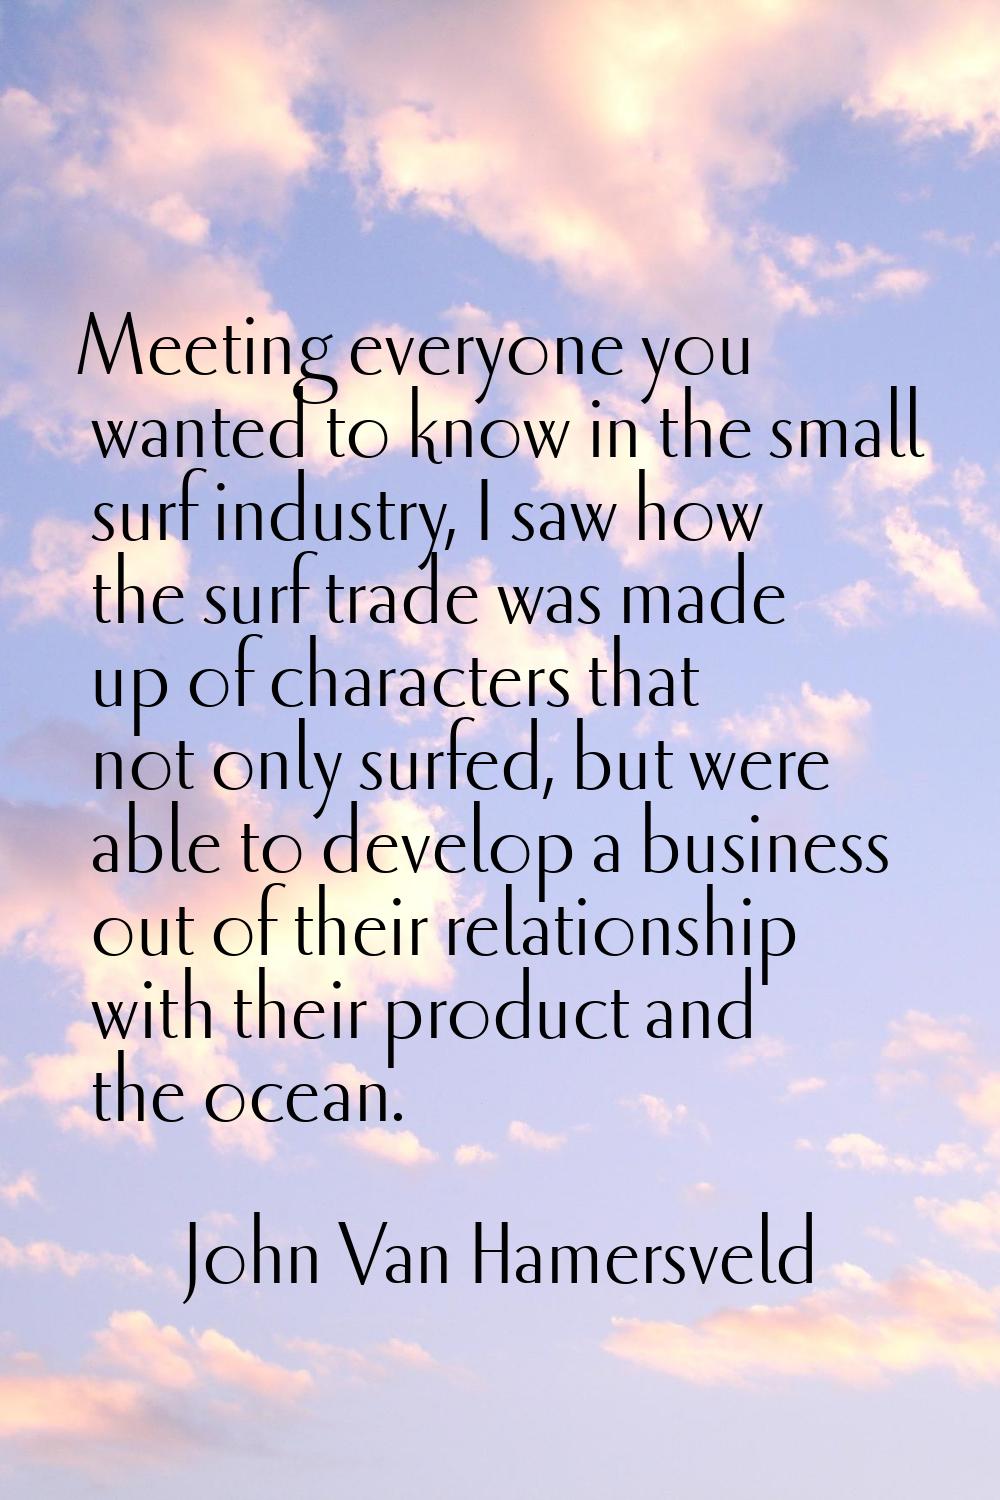 Meeting everyone you wanted to know in the small surf industry, I saw how the surf trade was made u